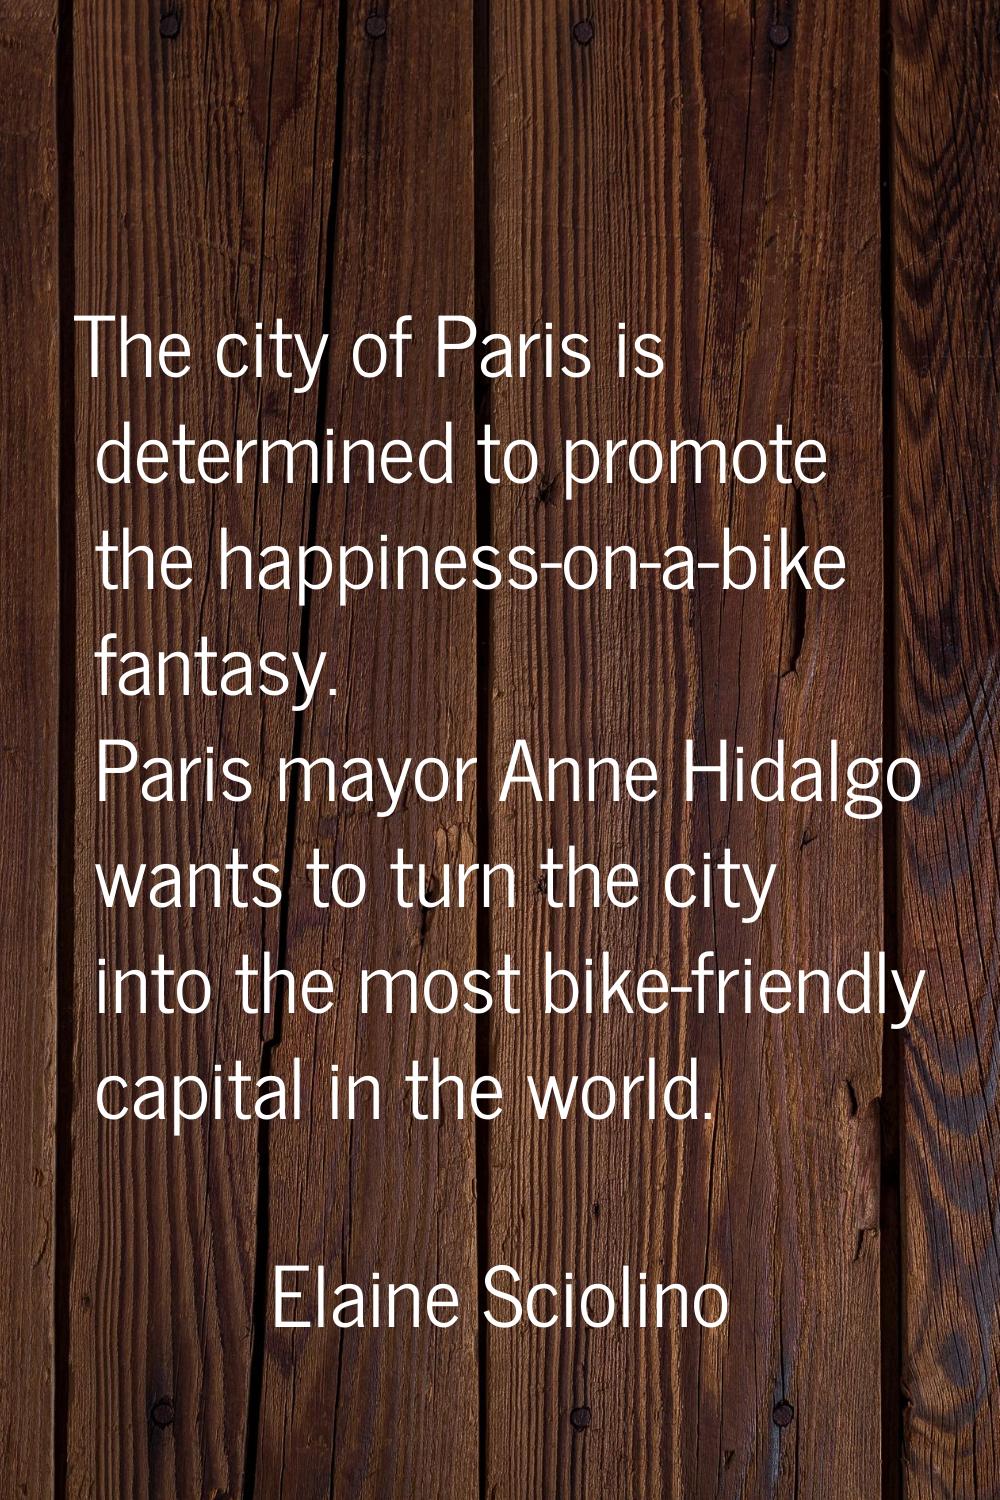 The city of Paris is determined to promote the happiness-on-a-bike fantasy. Paris mayor Anne Hidalg